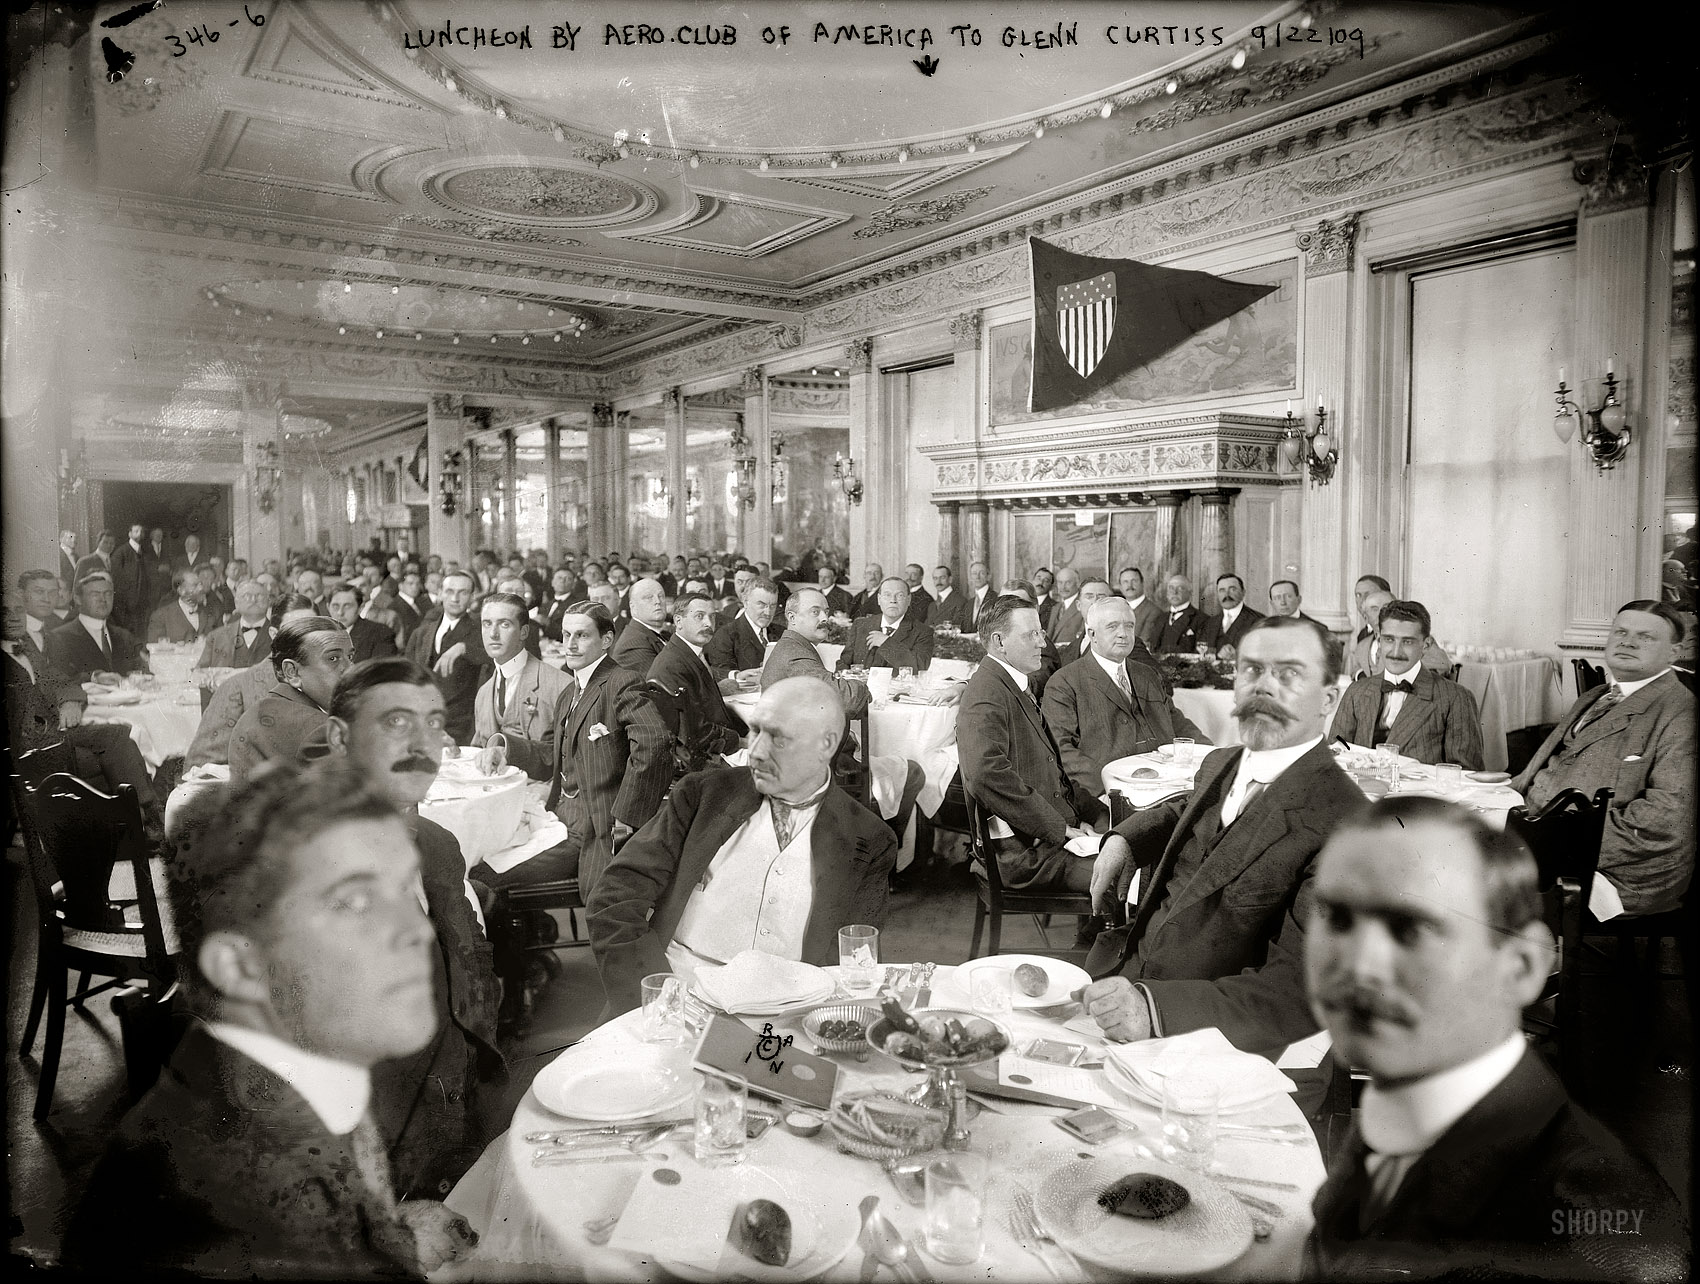 New York, Sept. 22, 1909. "Luncheon by Aero Club of America at Lawyers Club honoring Glenn Curtiss." 8x10 glass negative, Bain News Service. View full size.